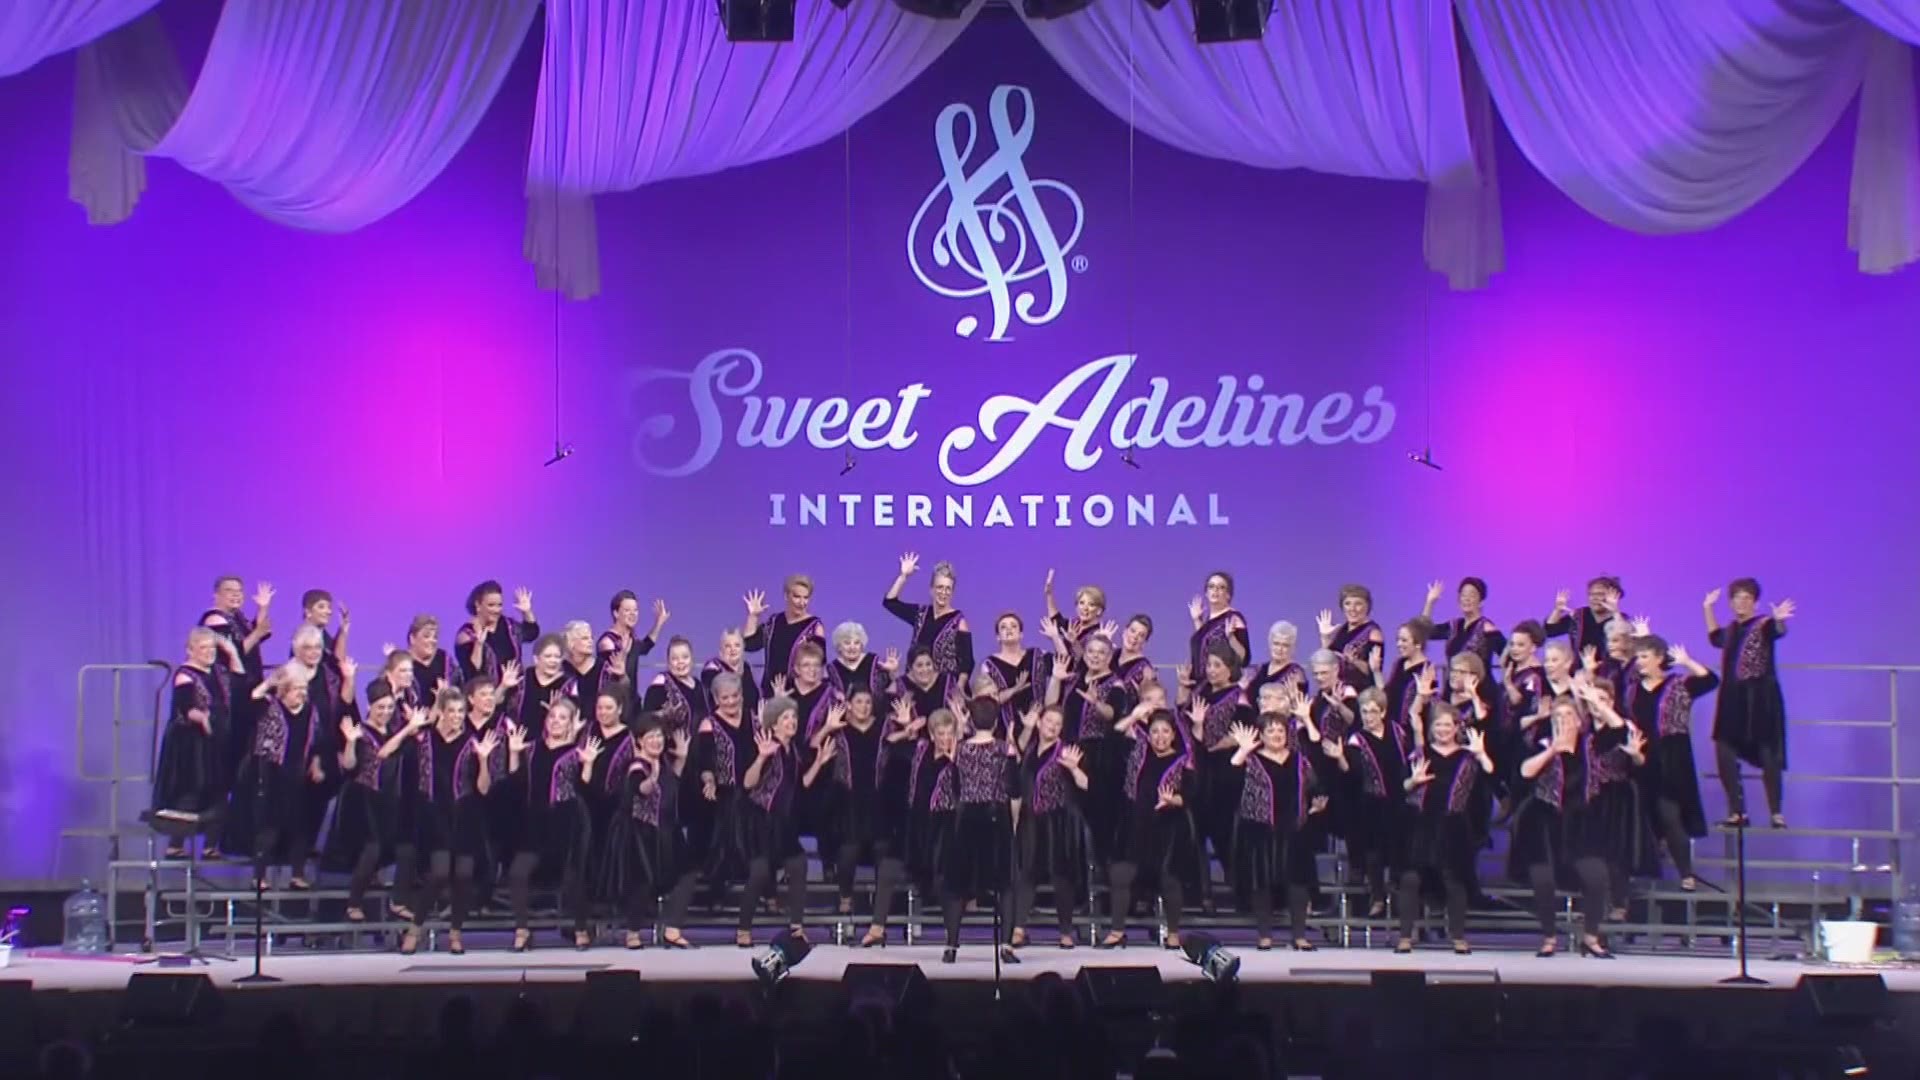 While celebrating their 70th anniversary of entertaining audiences, the Sweet Adelines found out they were among 10 nationwide chorus groups to go to Hawaii.